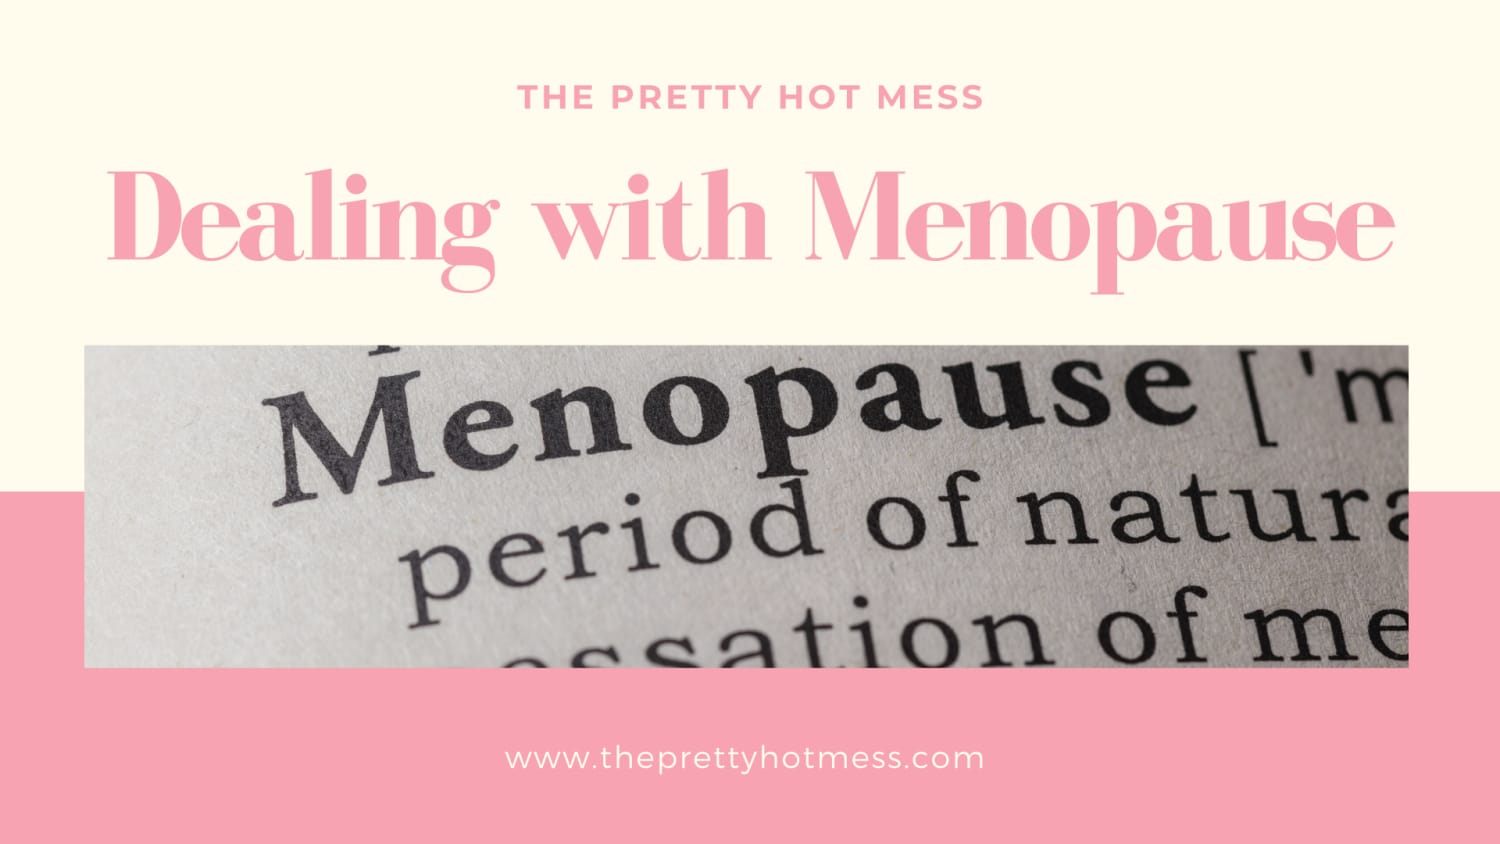 Want to beat up the menopause fairy??